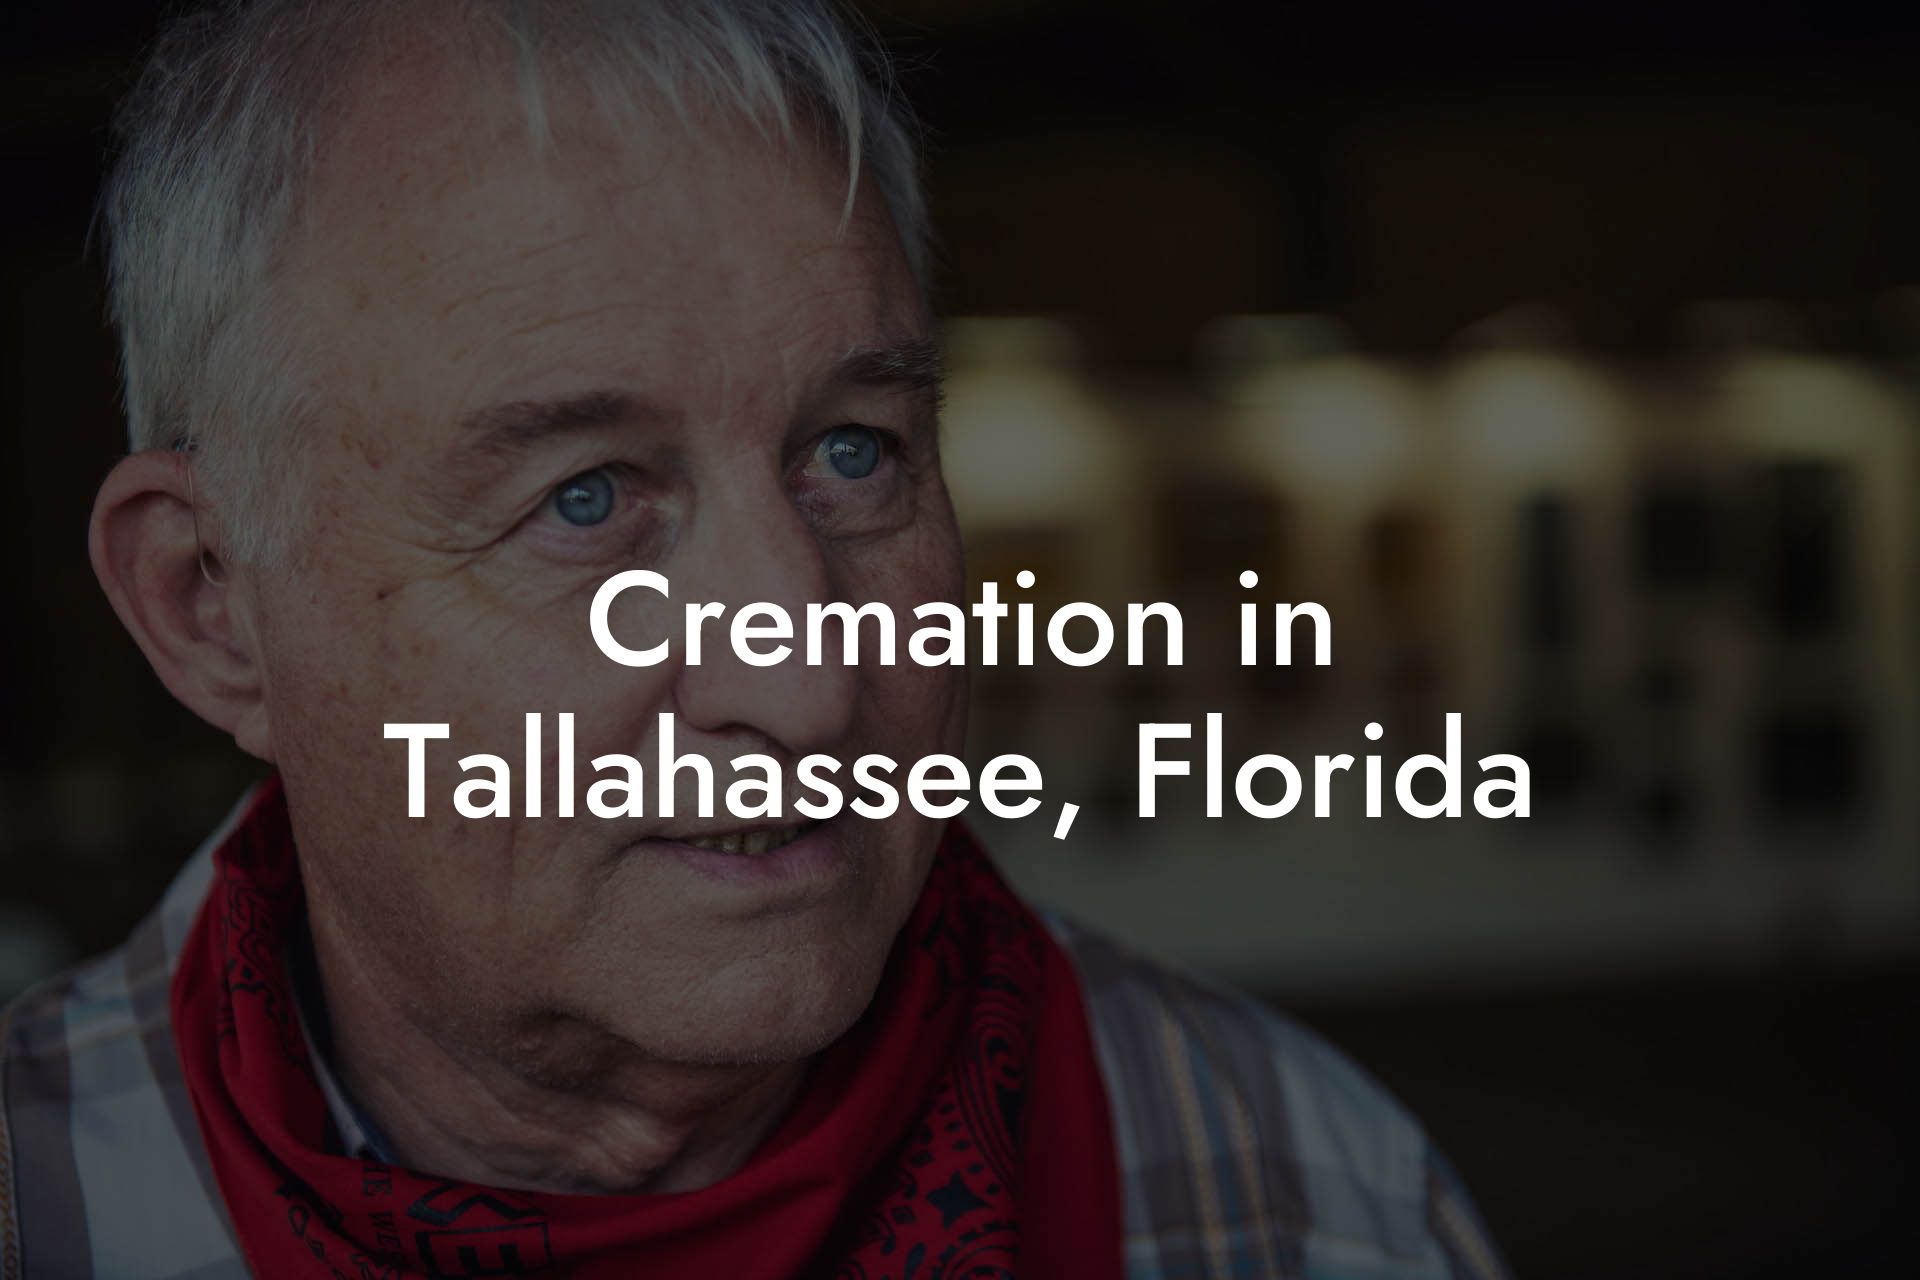 Cremation in Tallahassee, Florida